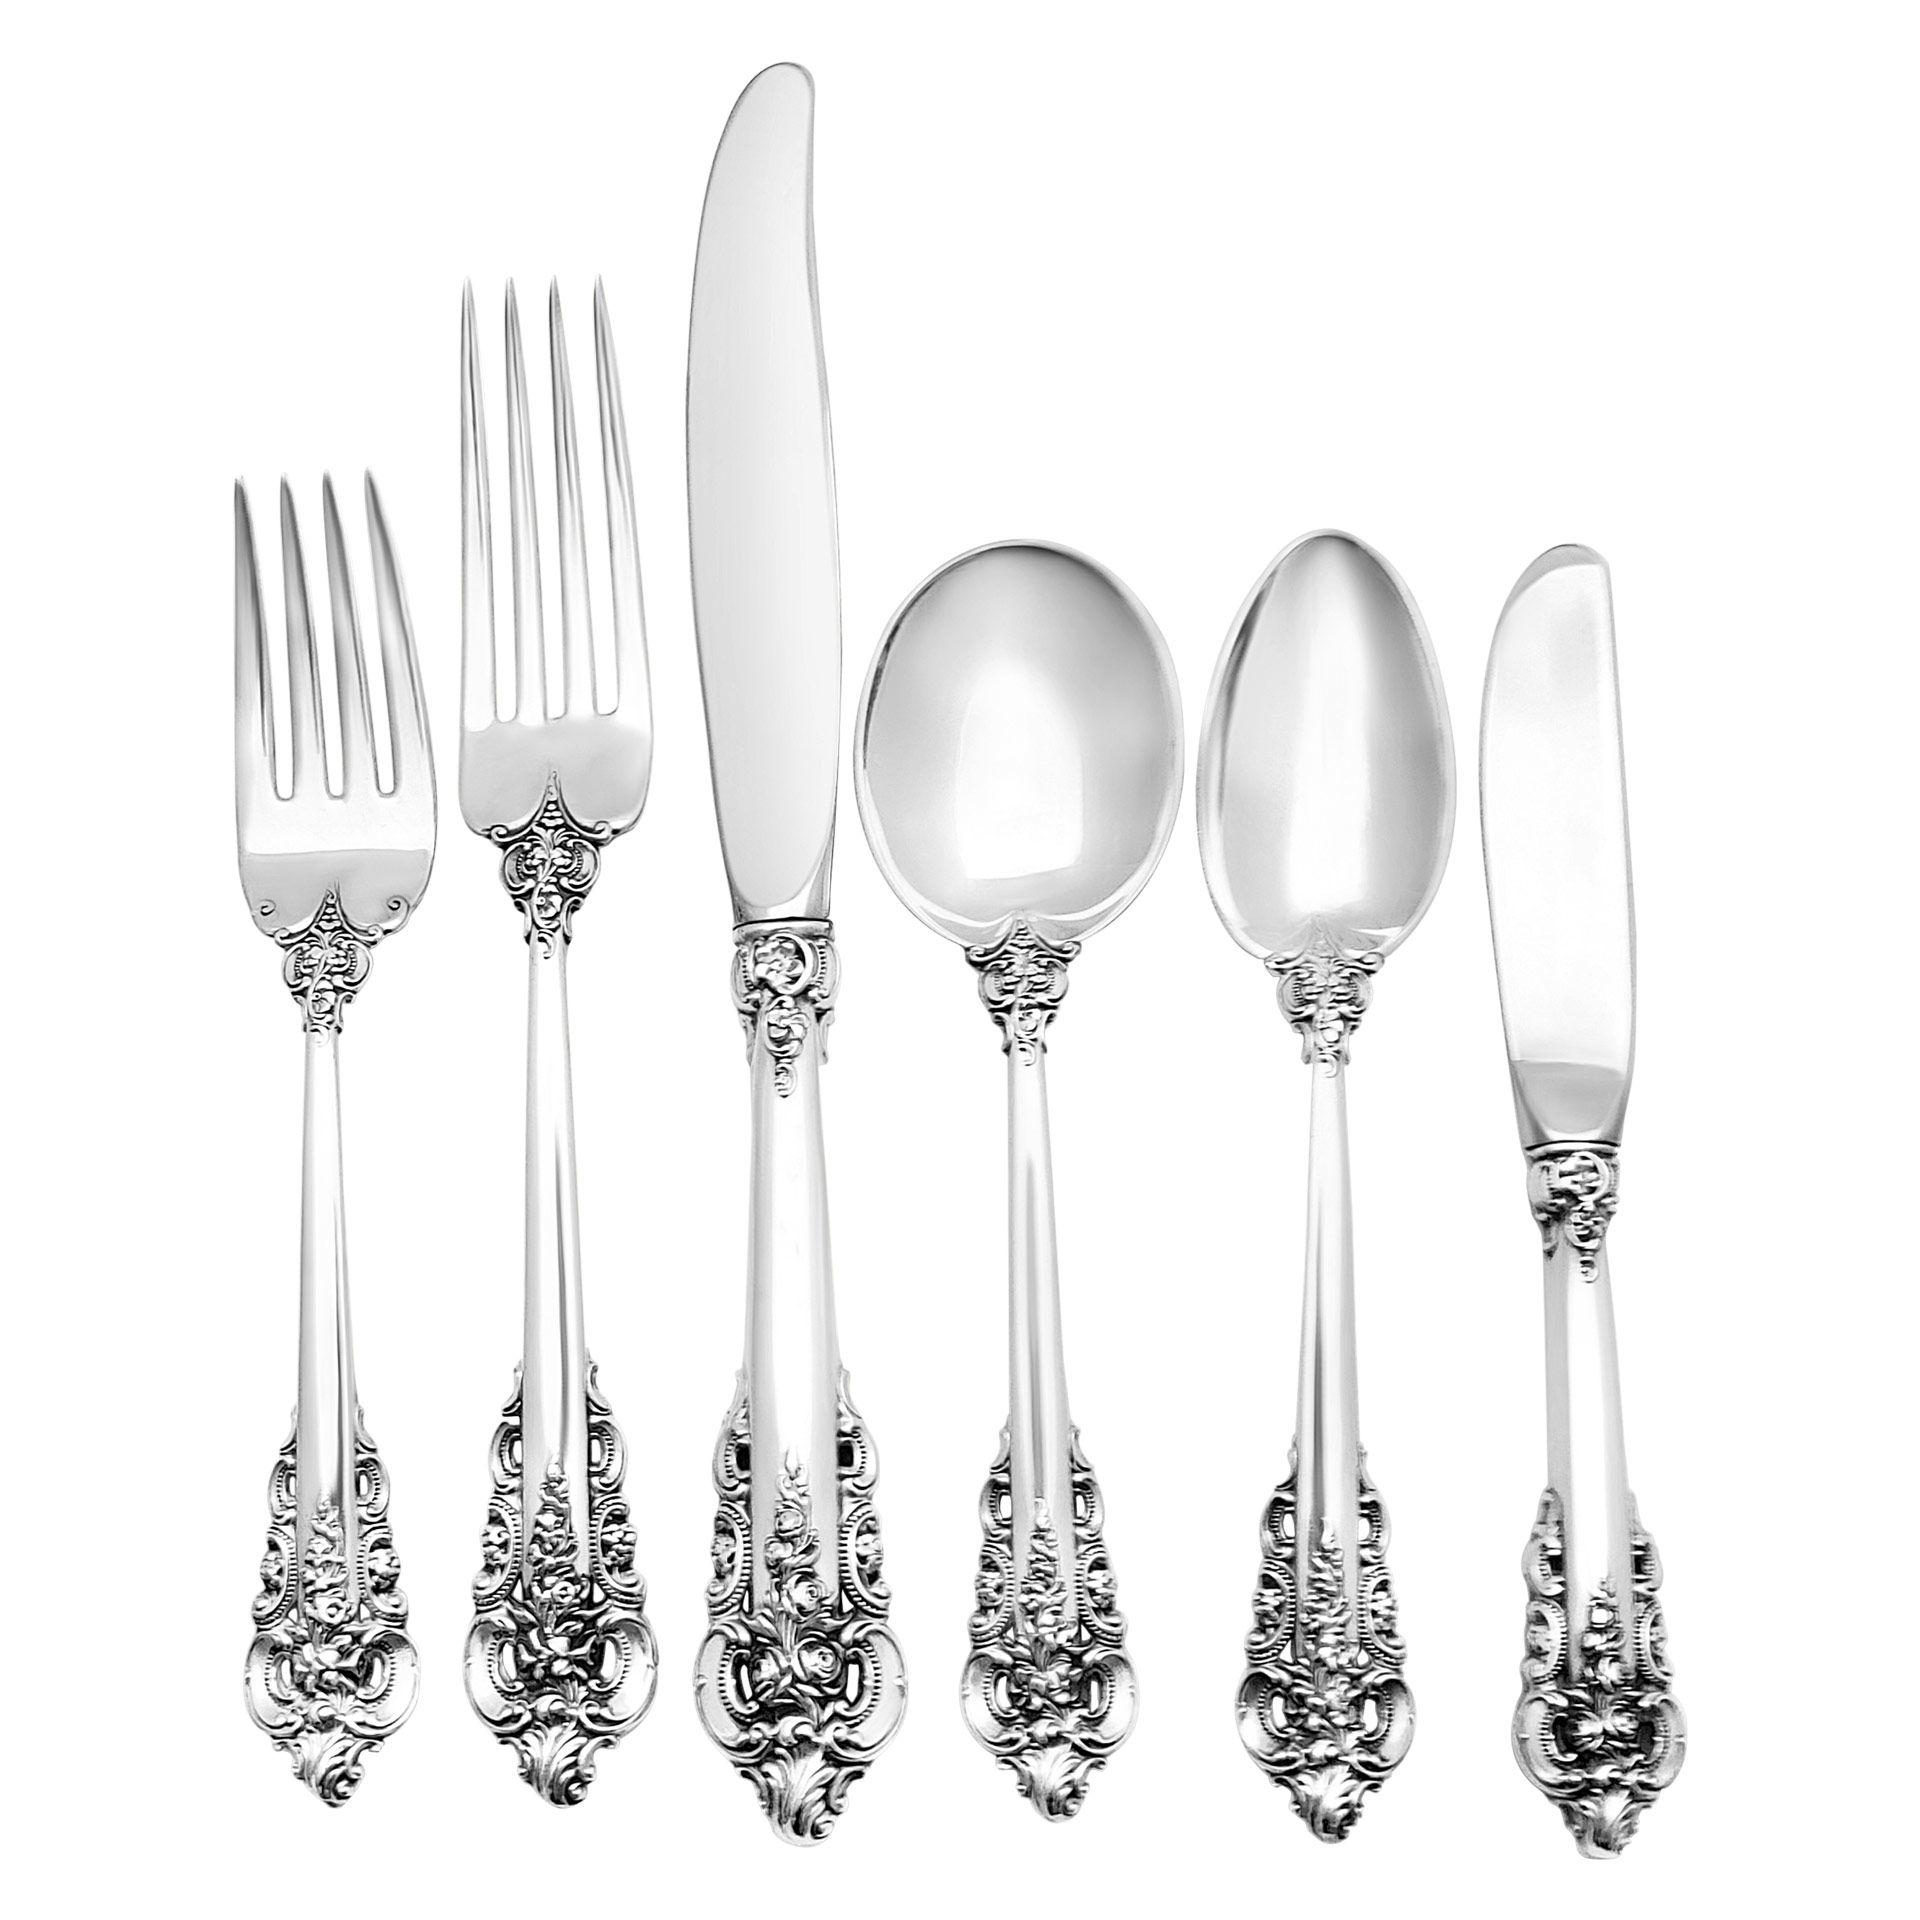 "GRANDE BAROQUE" Sterling Silver Flatware Set patented by Wallace in 1941- 6 place settings for 12 + 12 serving pieces. TOTAL: 84 pieces total.